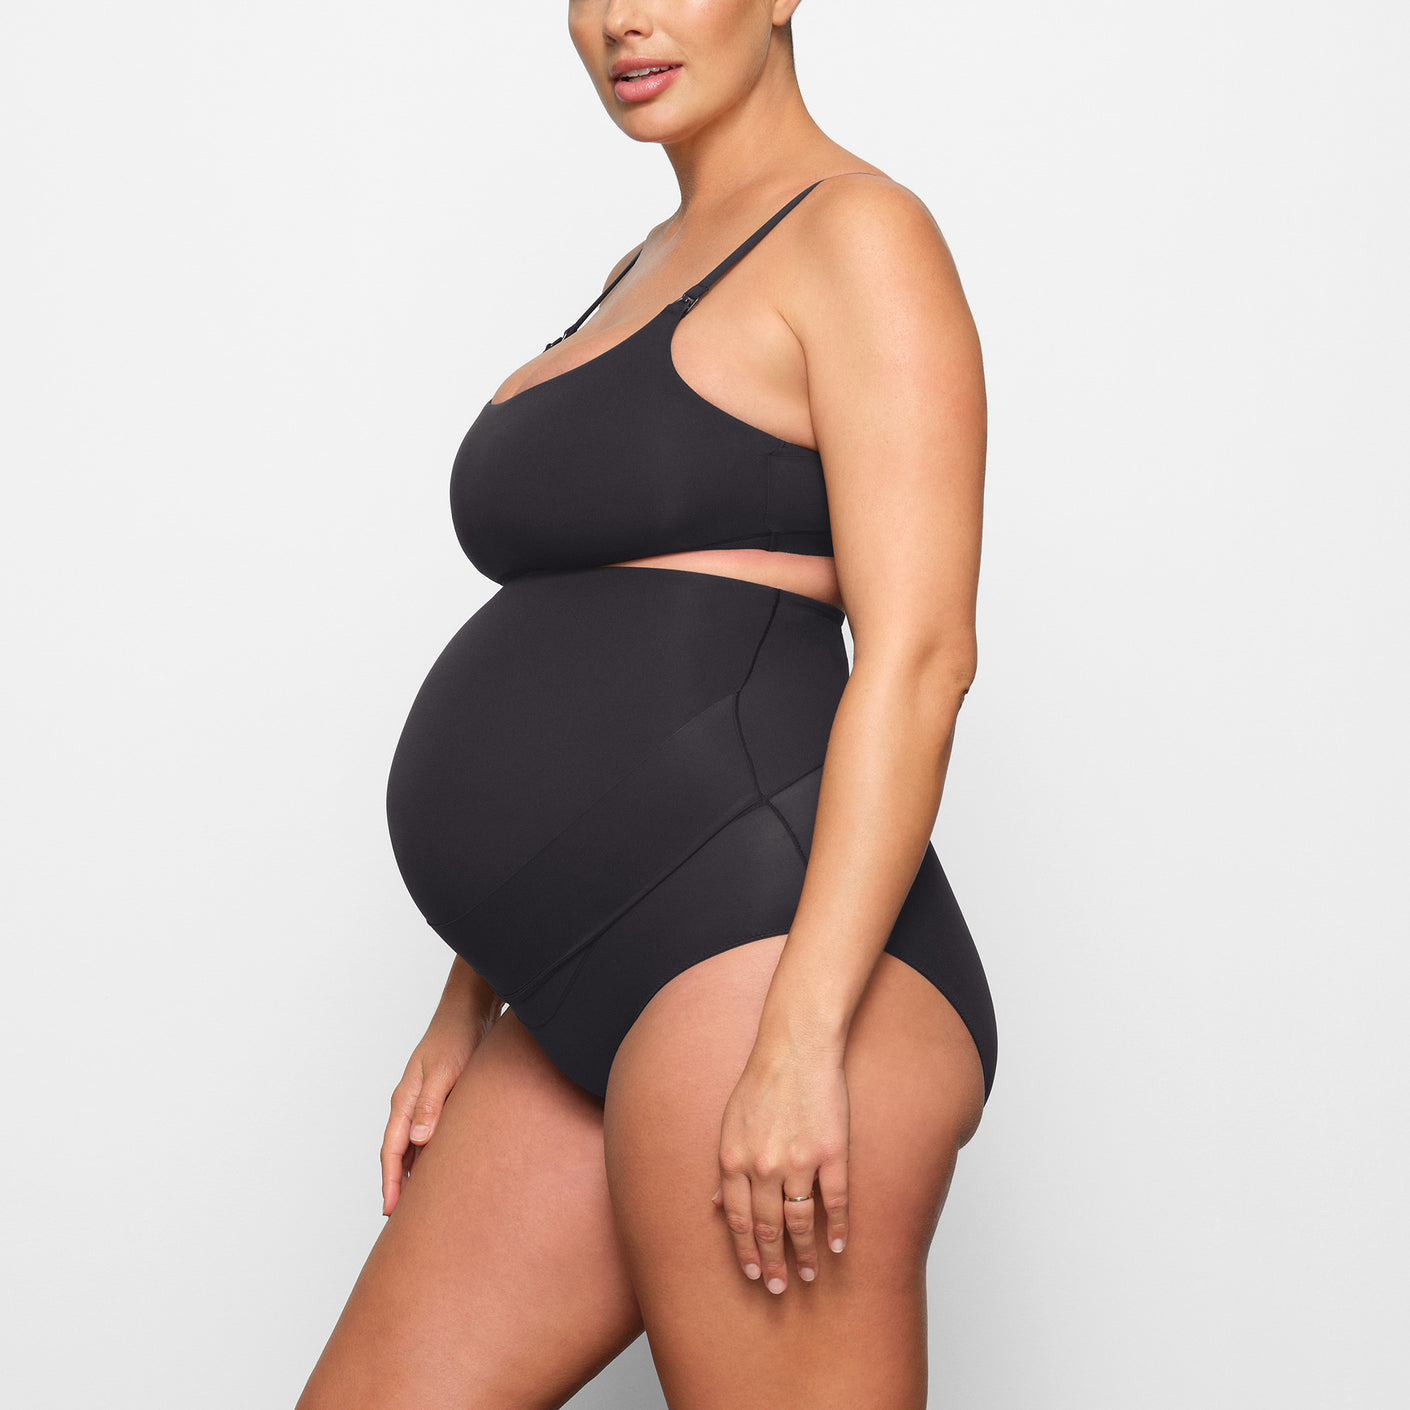 Track Fits Everybody Maternity Pumping Scoop Bralette - Onyx - XXS at